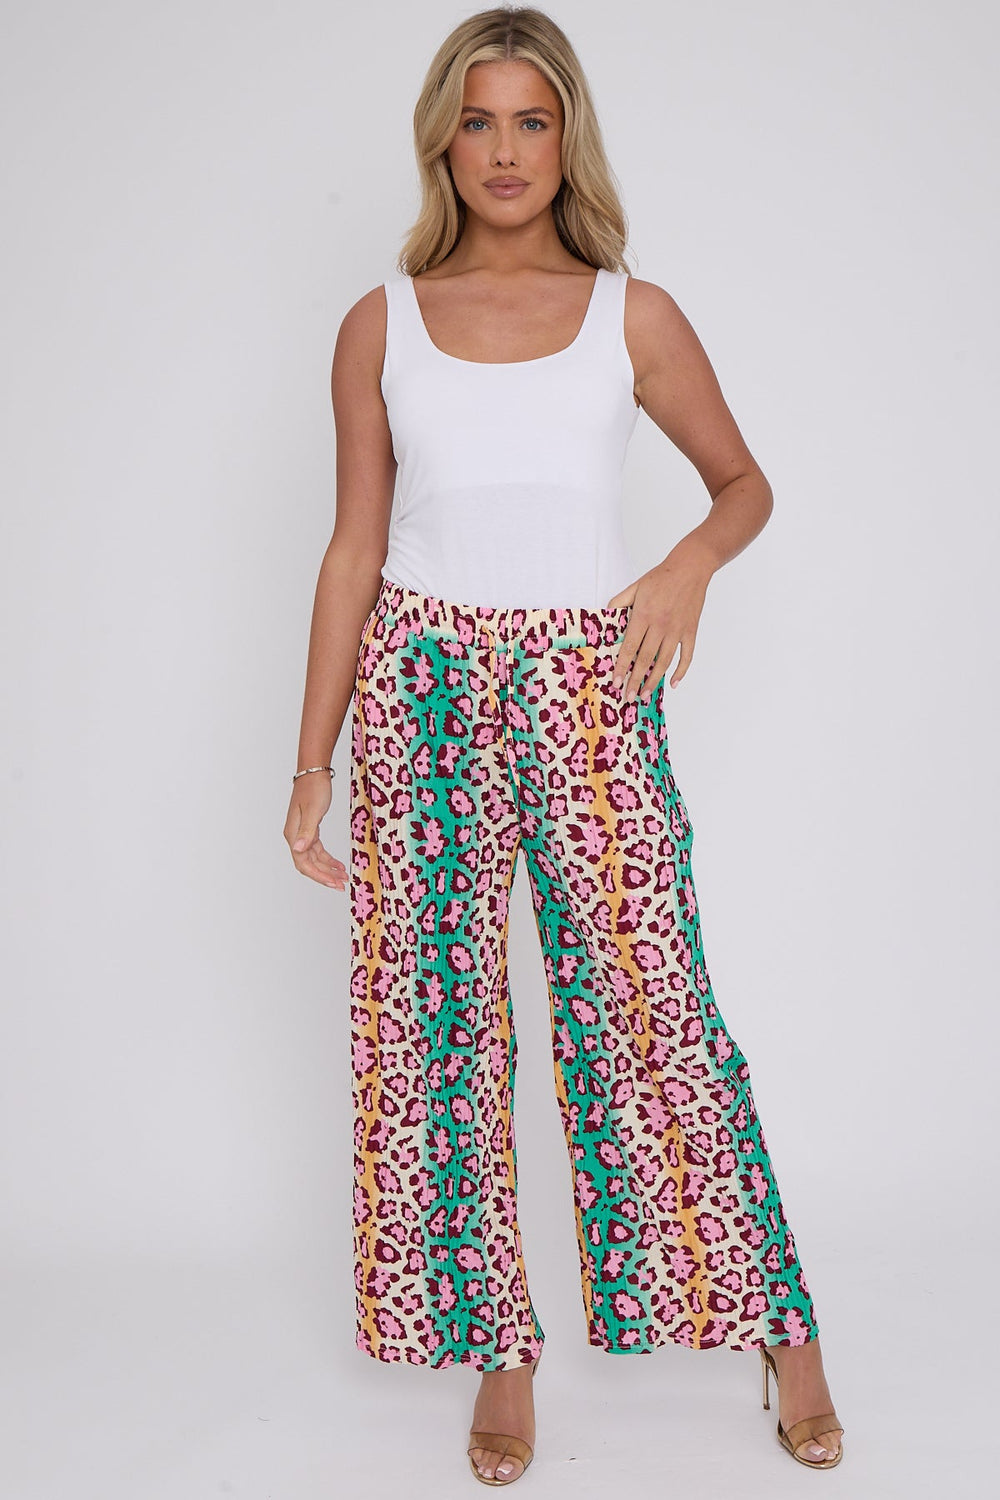 LEOPARD PLEATED TROUSER(MIXED COLOUR PACK) (8268485001464) (8277891121400)